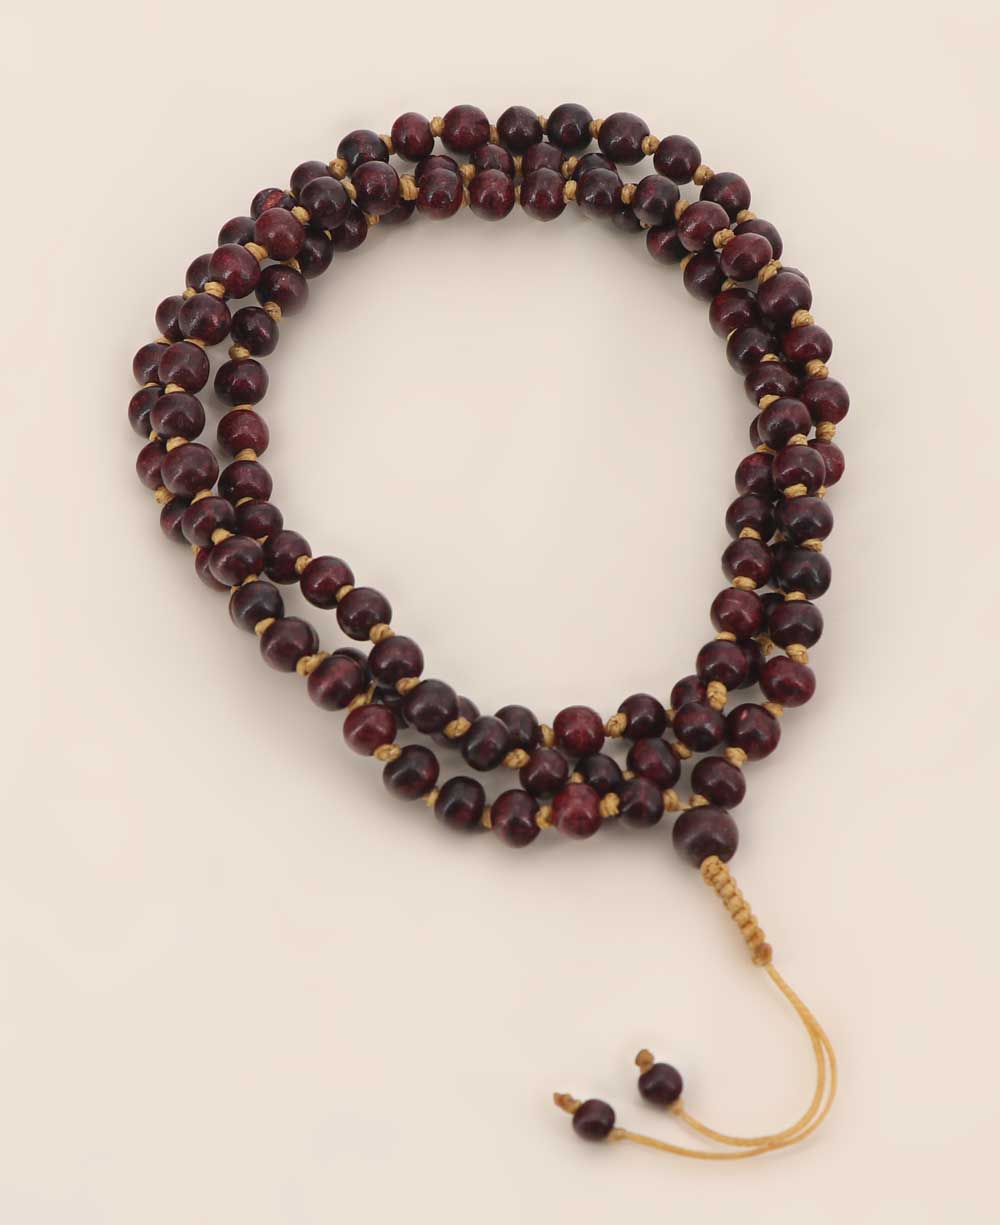 Rosewood Meditation Mala with Knotted Beads - Prayer Beads 6mm